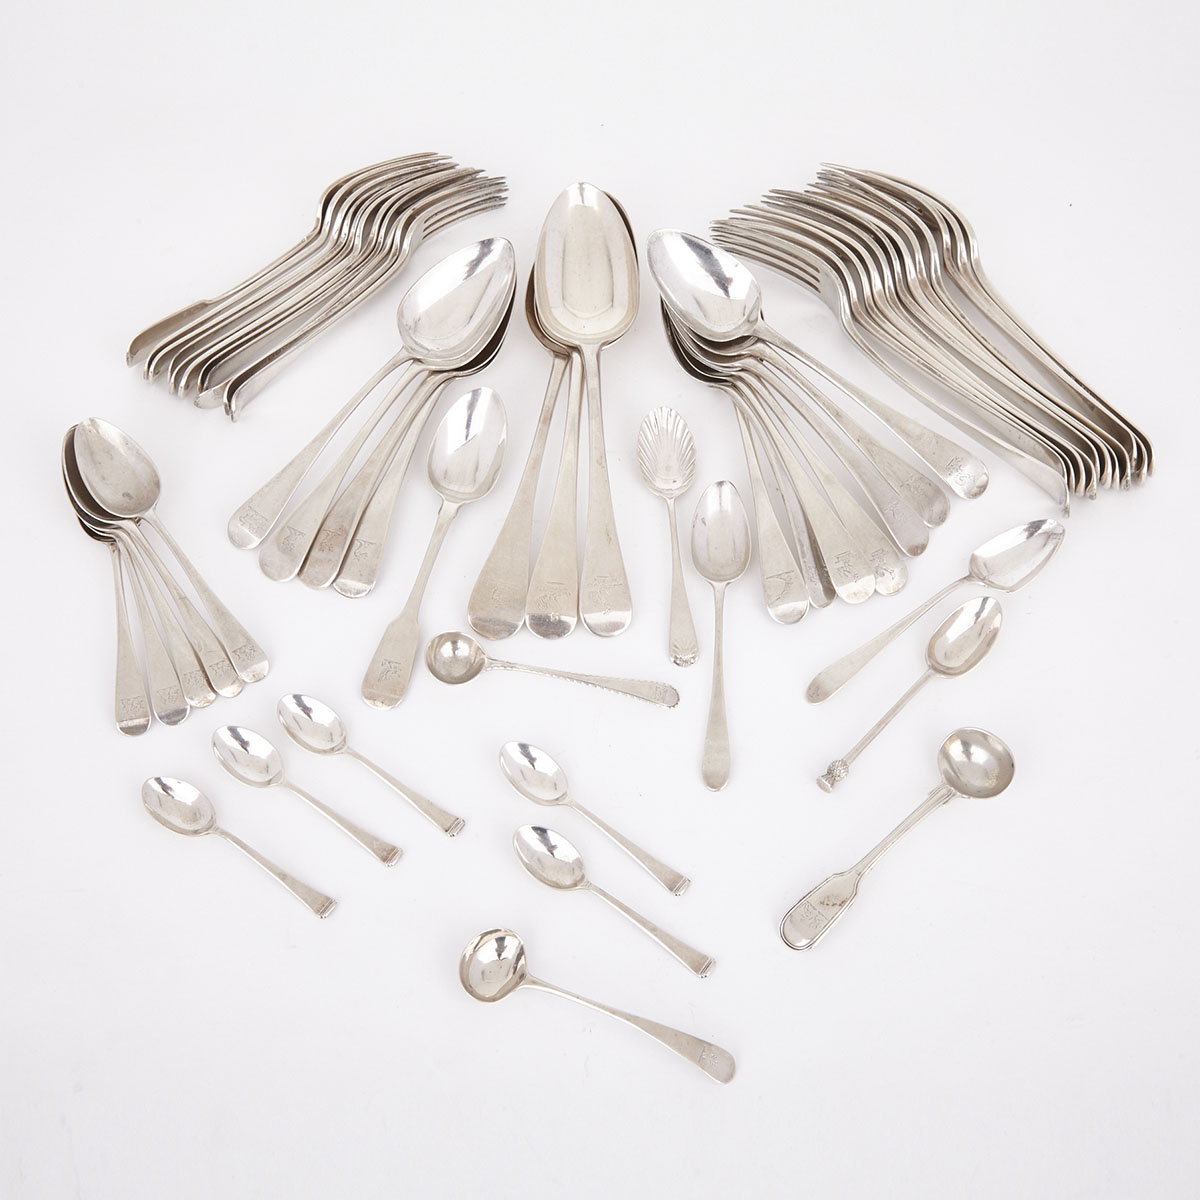 Group of George III and Later English Silver Flatware, 18th-20th century